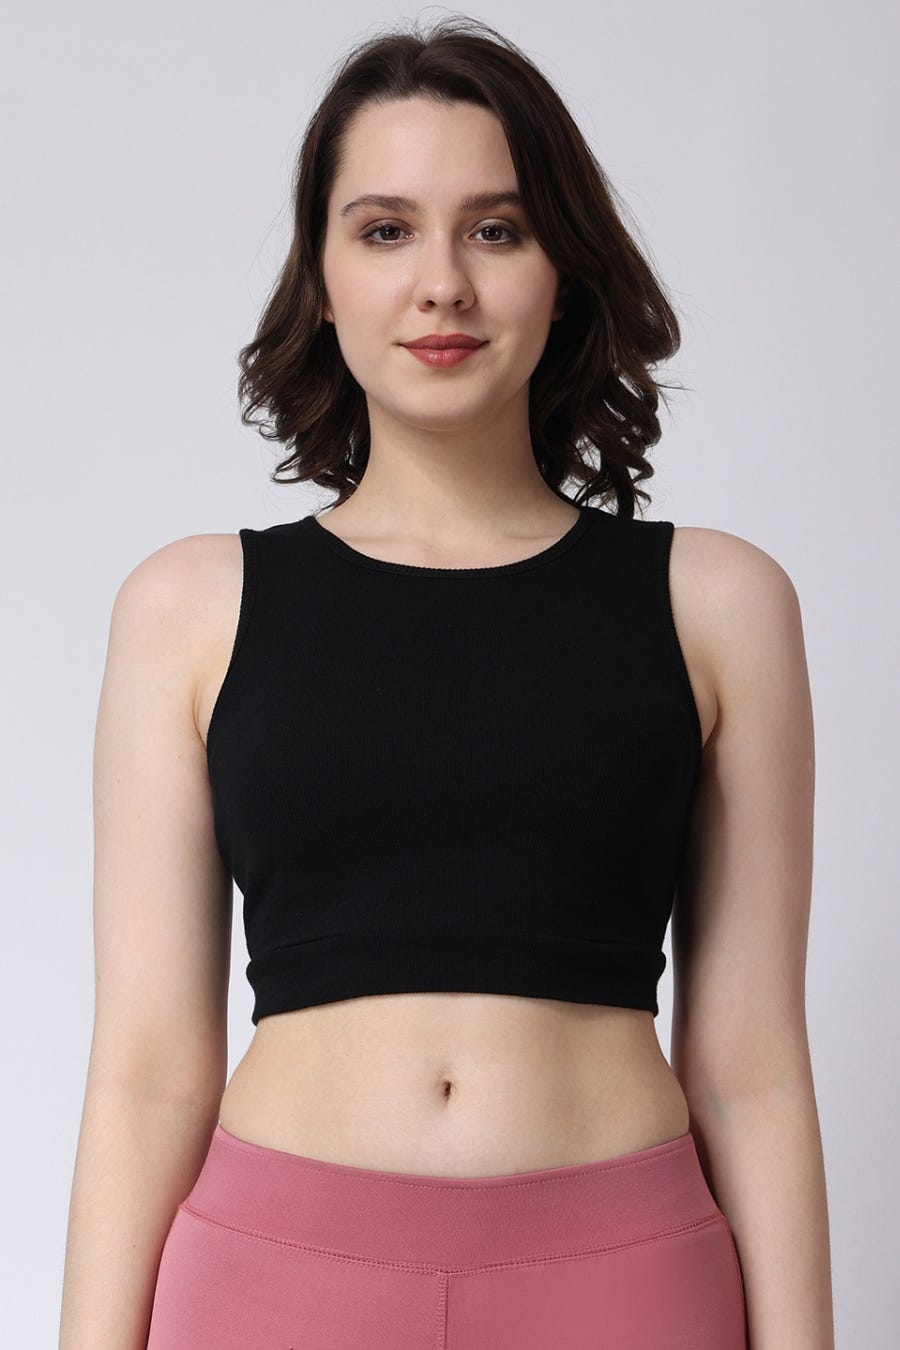 Womens Gym Tops - Cropped Sports Tops